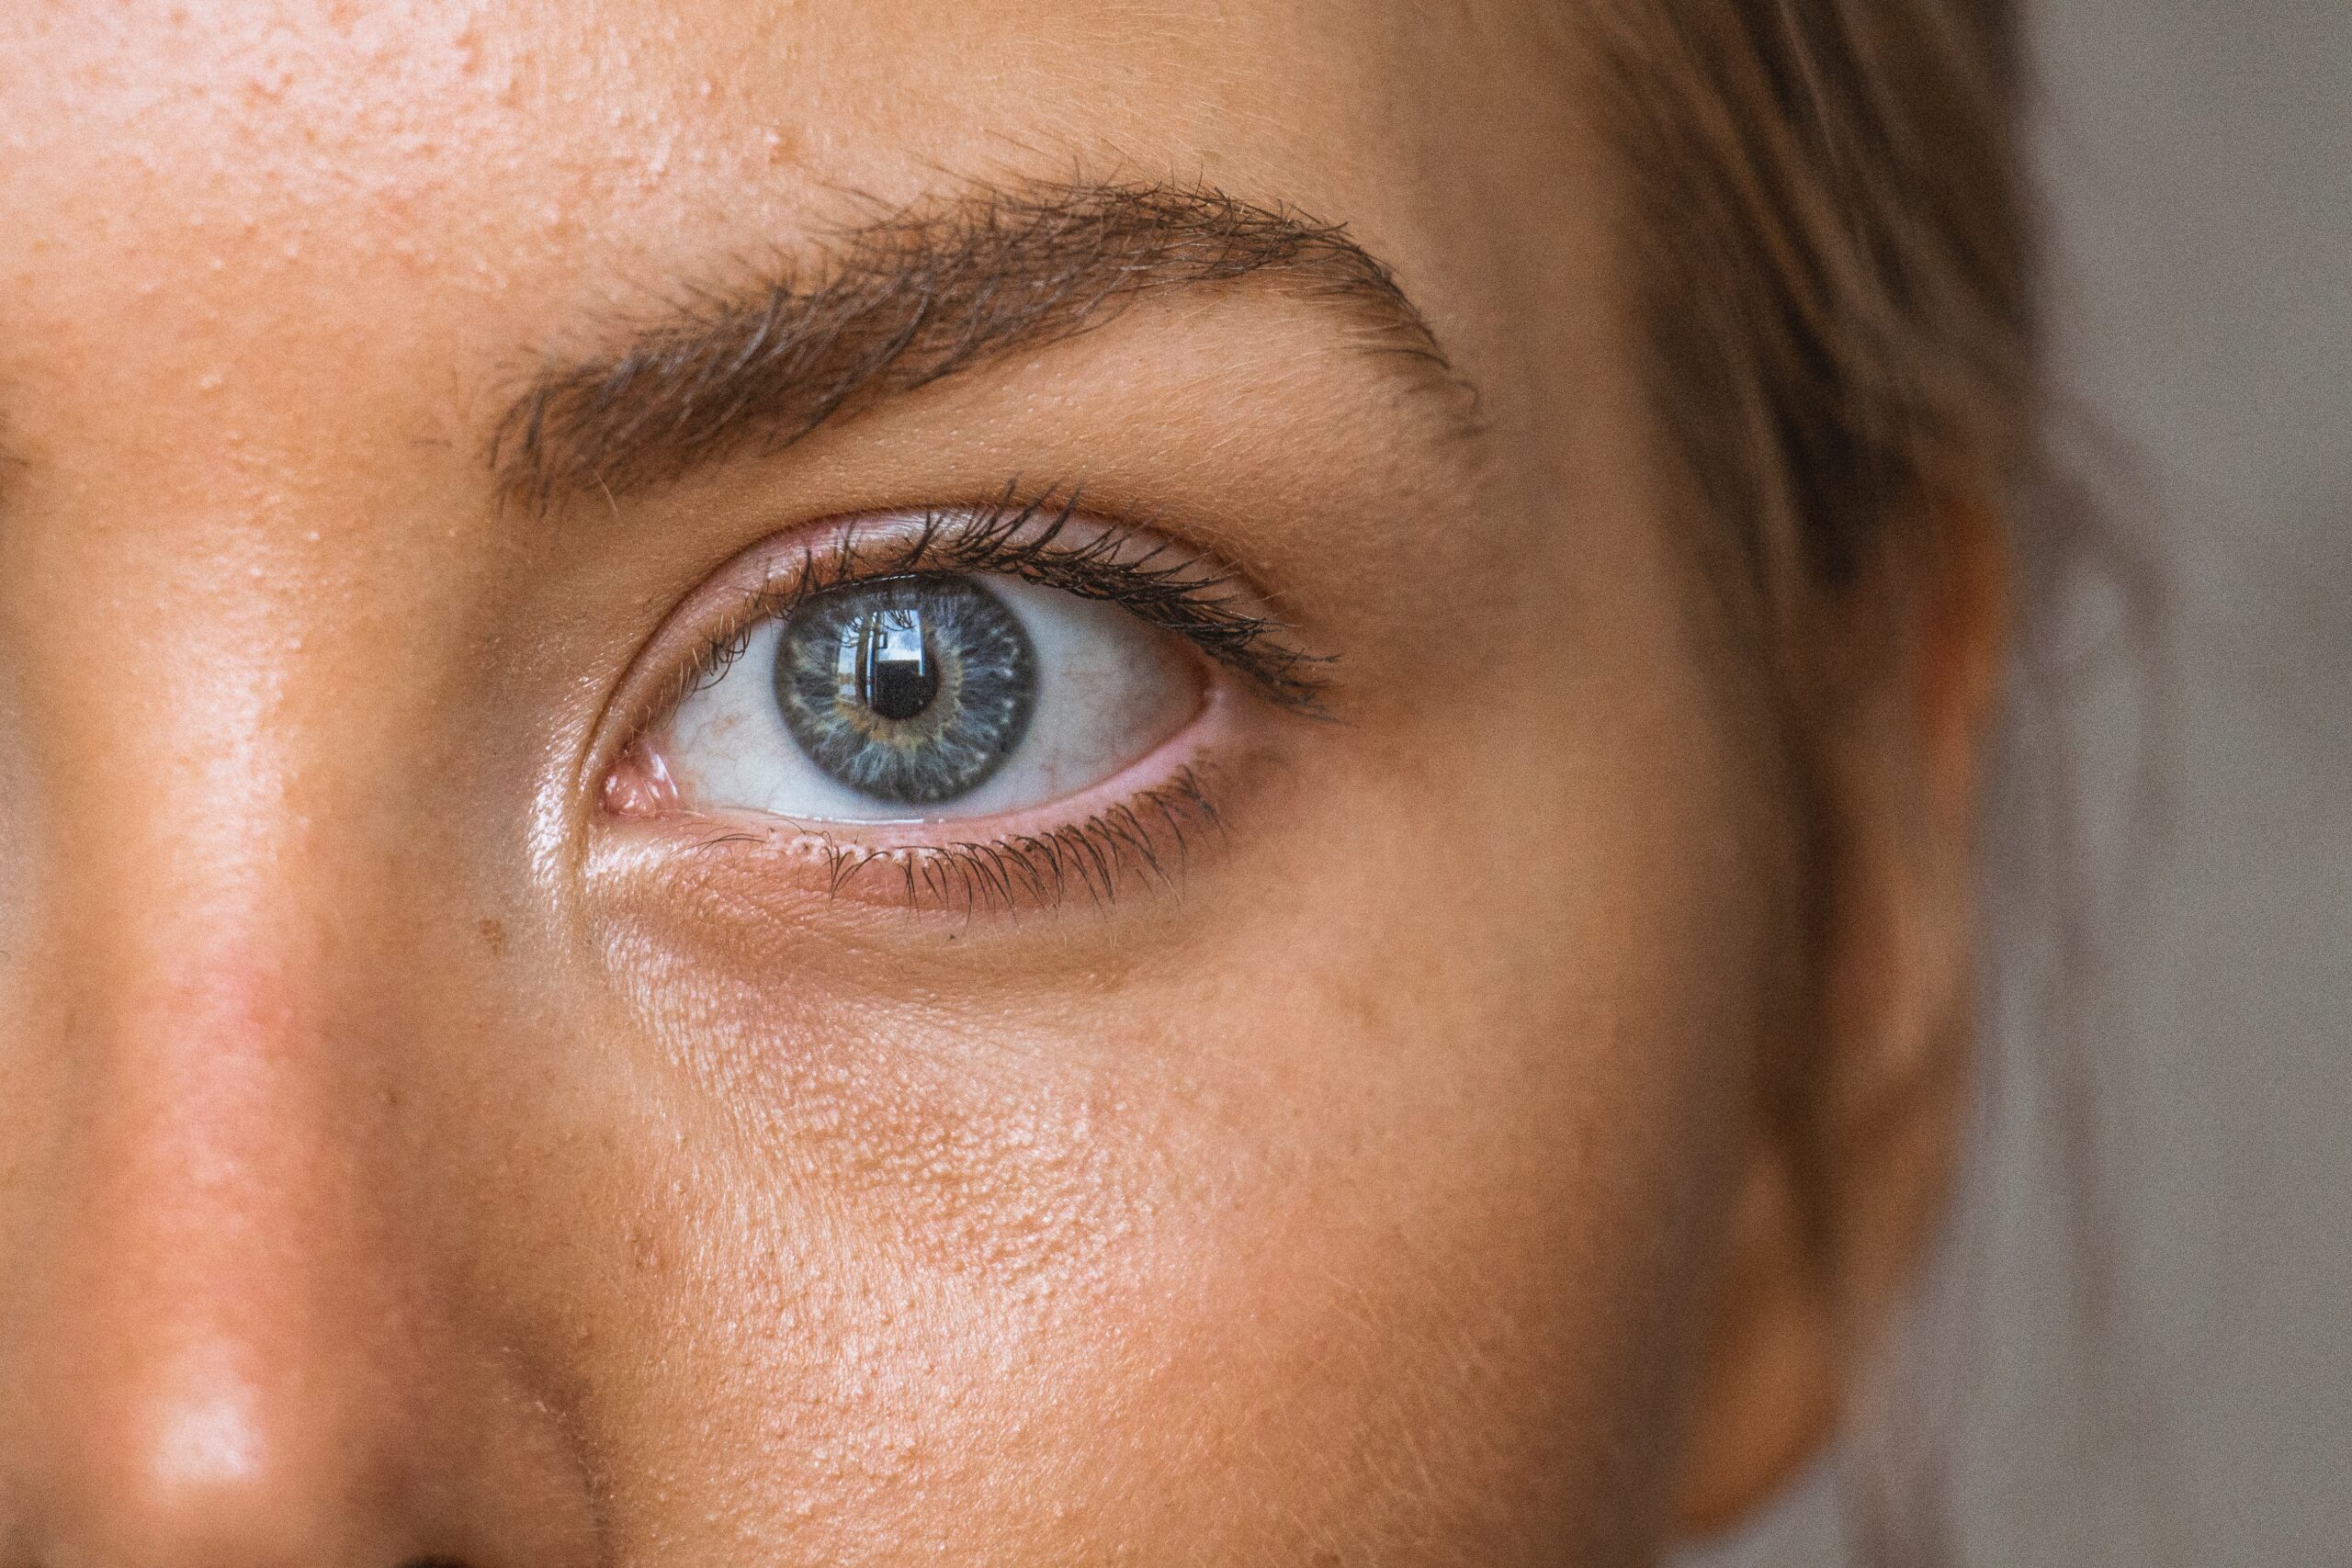 woman's face and eye showing a face of lyme disease